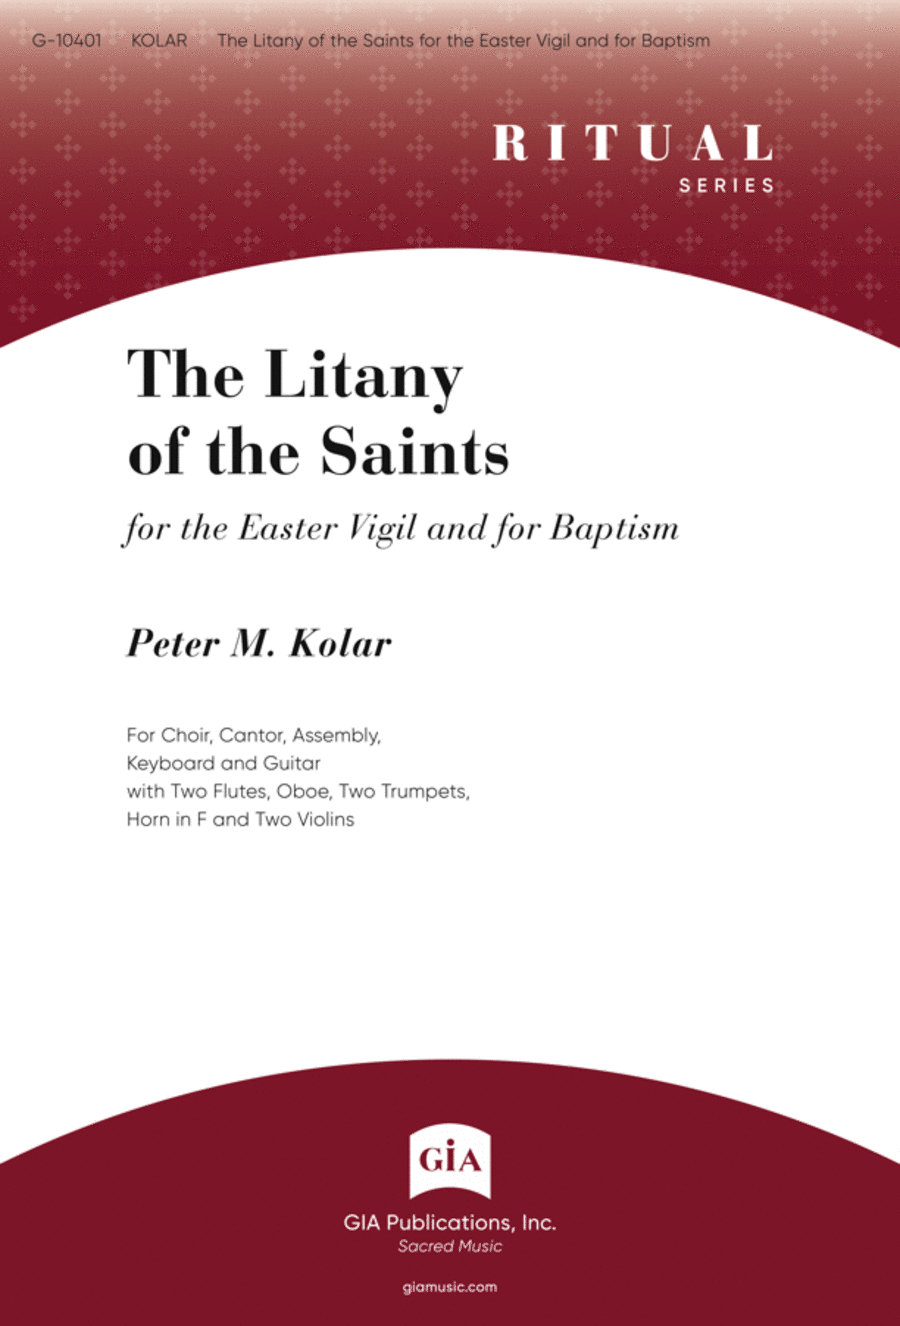 The Litany of the Saints for the Easter Vigil and for Baptism